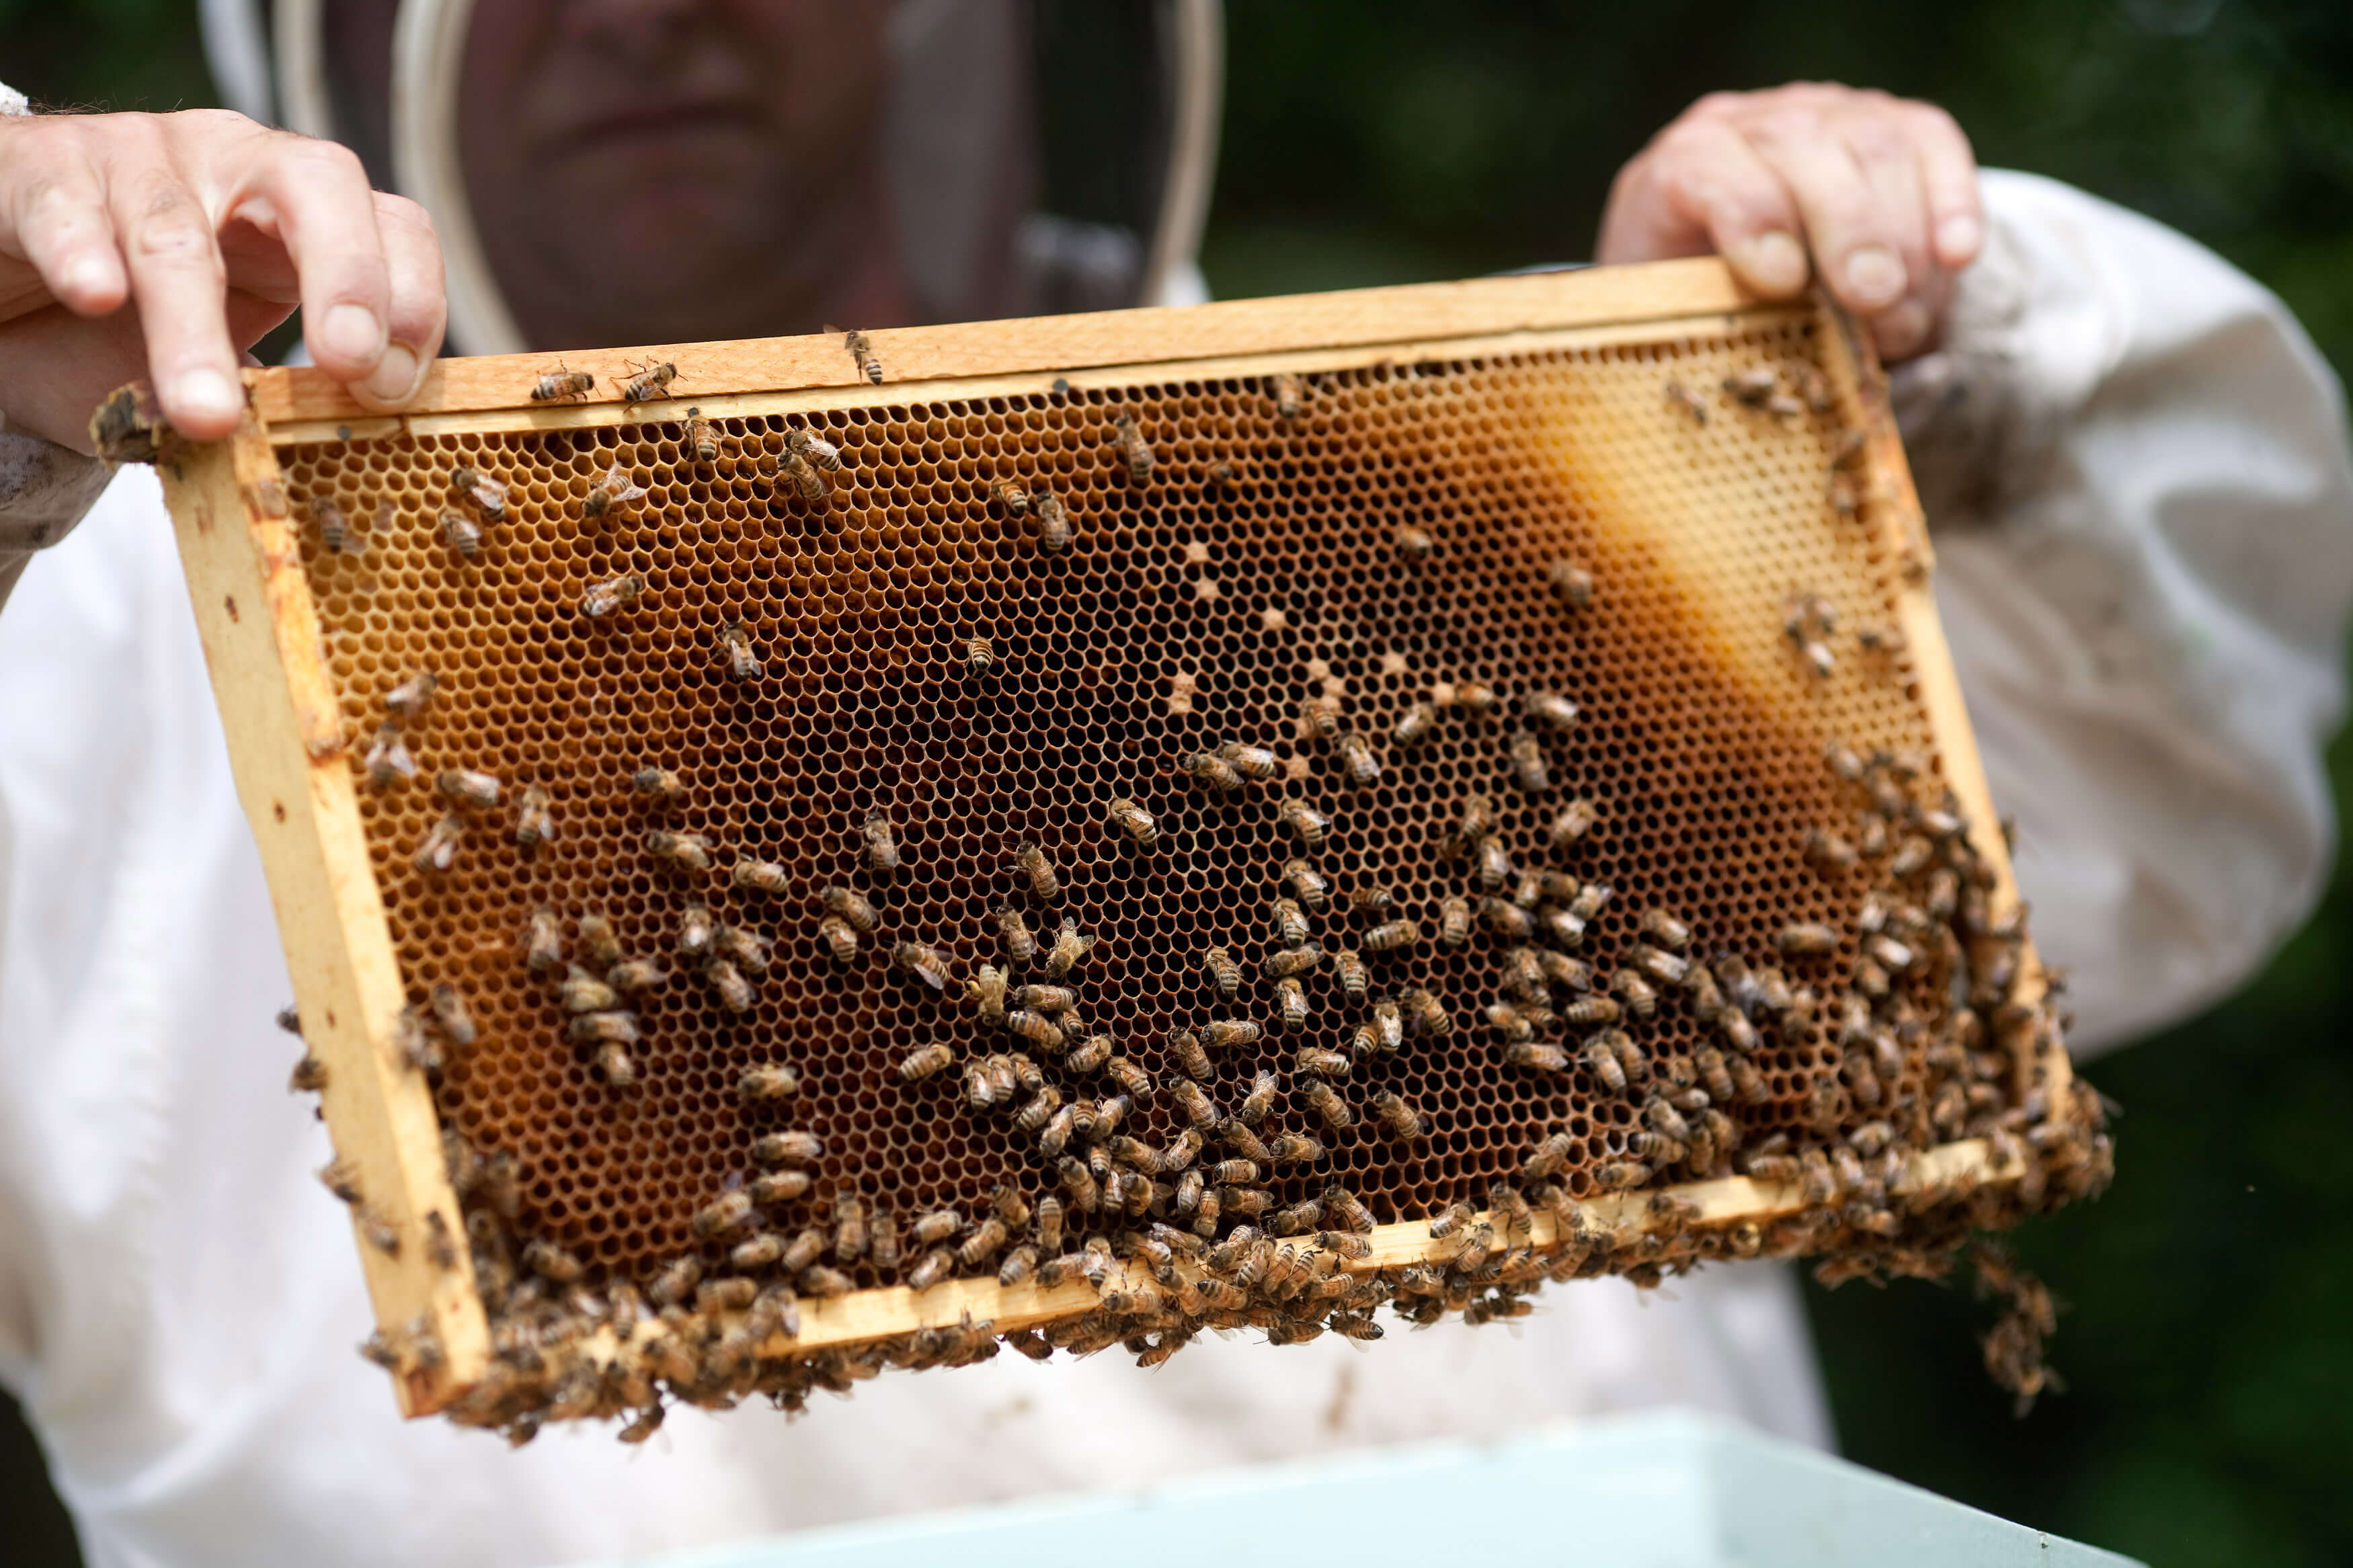 Bee-Go Pint  o remove bees from honey supers.effective when harvesting on cooler 